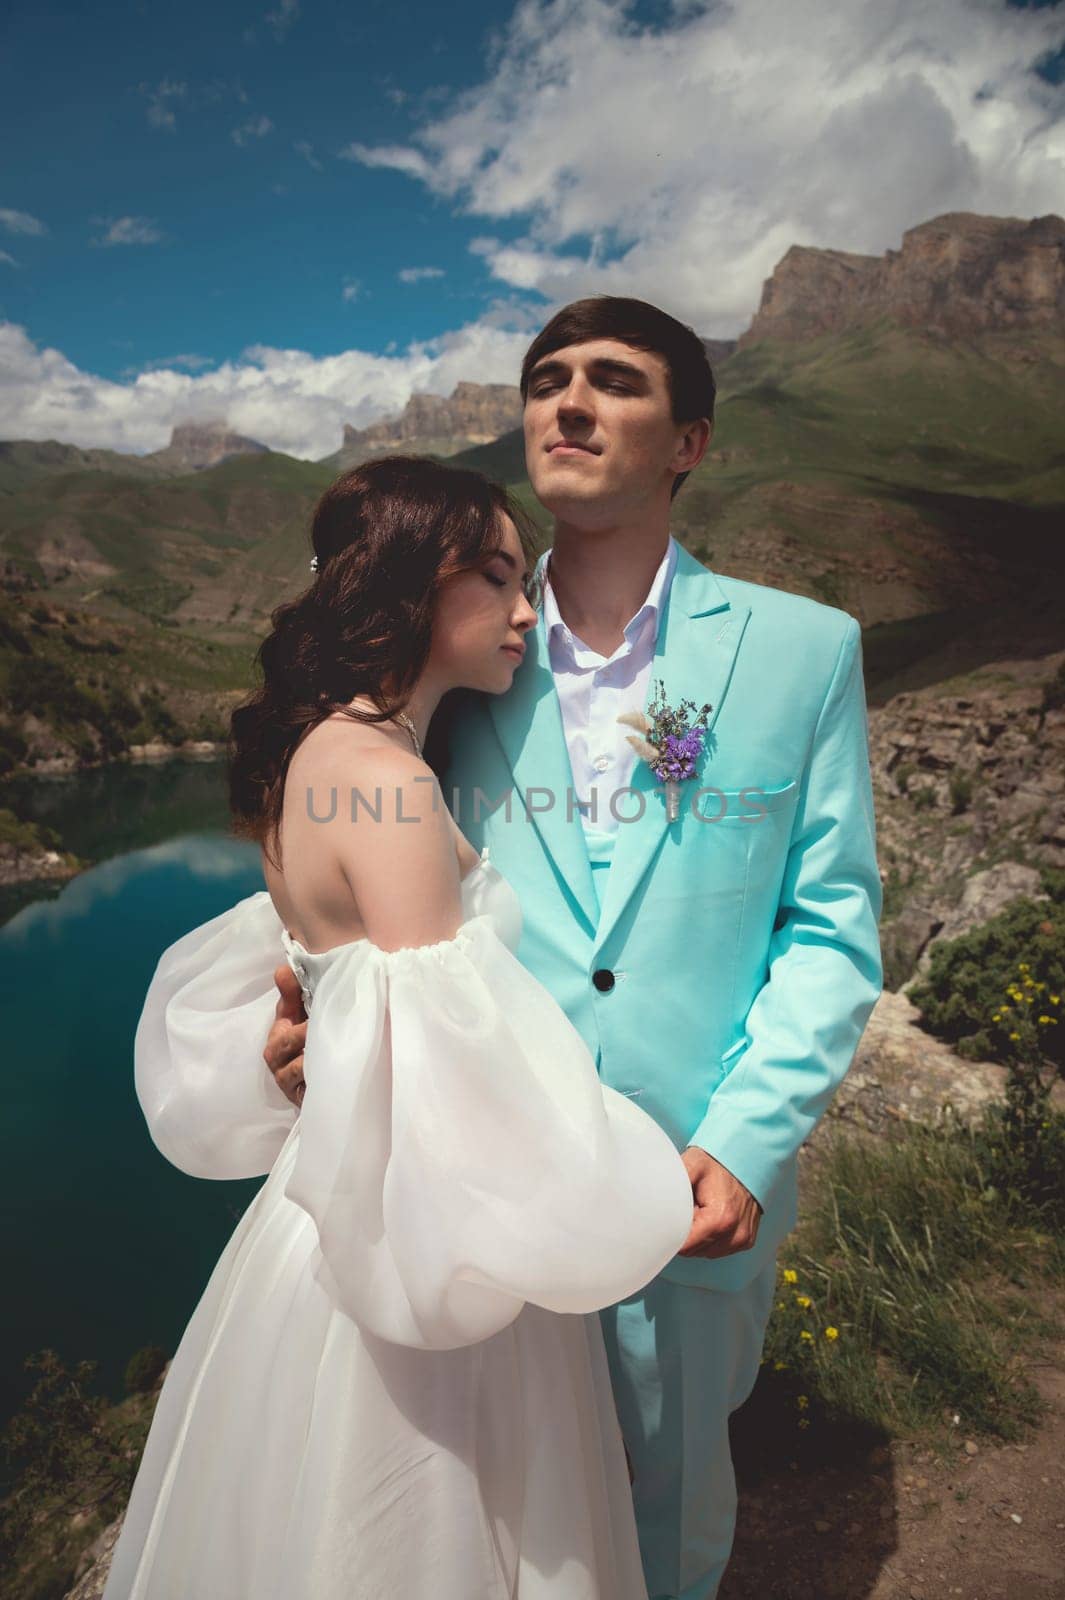 A beautiful wedding couple hugs tenderly against the backdrop of a mountain river and lake, the bride's long white dress.